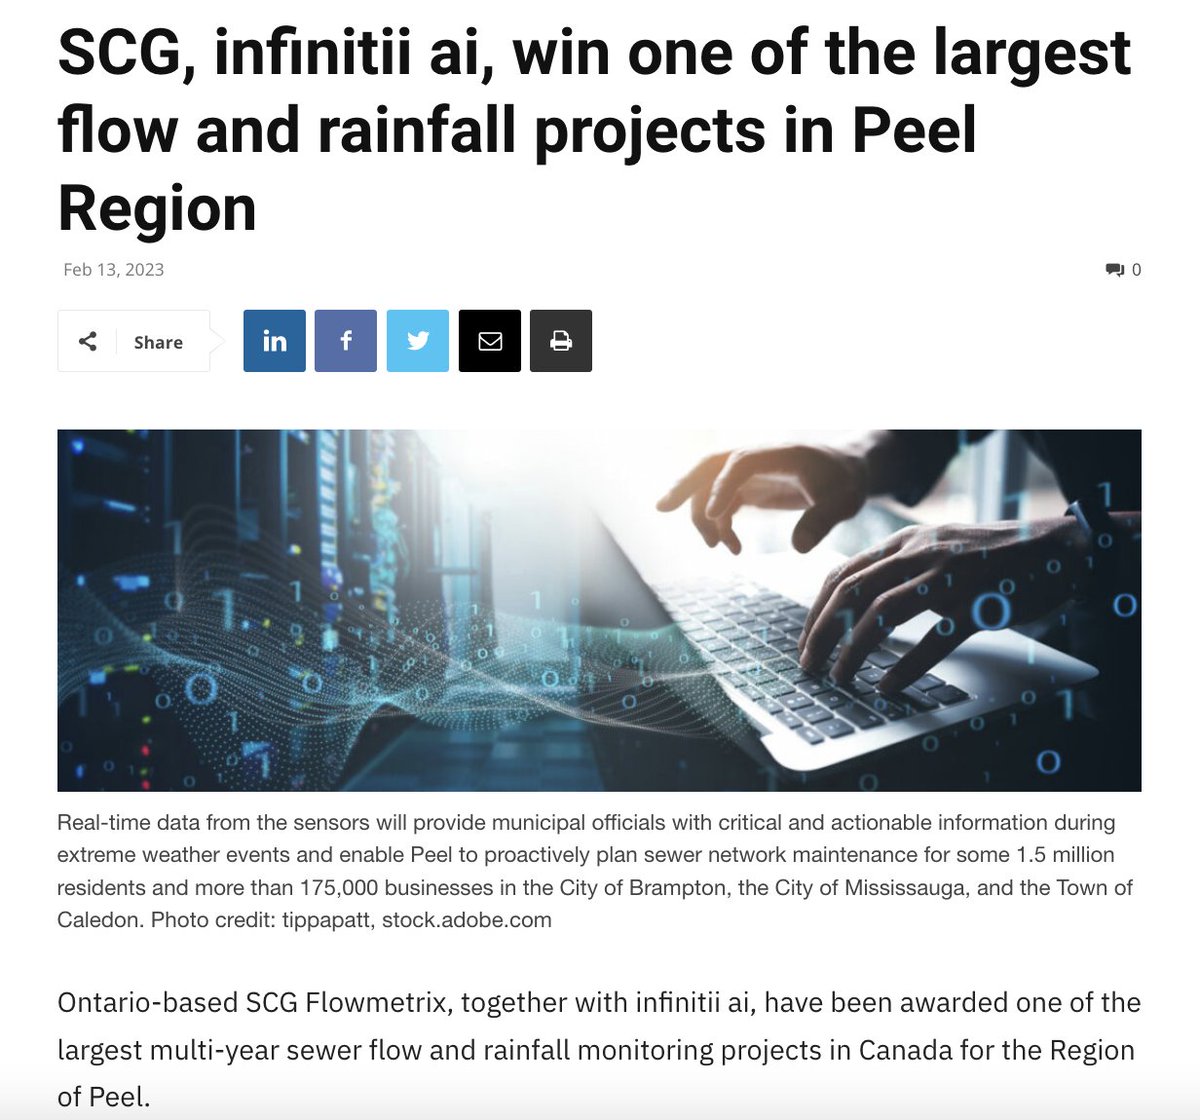 The editorial team @ESEMAG cover the @infinitiiai and #SCGFlowmetrix partner win for one of the largest #flow and #rainfall #data delivery projects in #Canada with @regionofpeel. 

$IAI.ca $CDTAF $7C5

#MachineLearning #ML #AI #digitalwater #SmartCity

esemag.com/wastewater/scg…